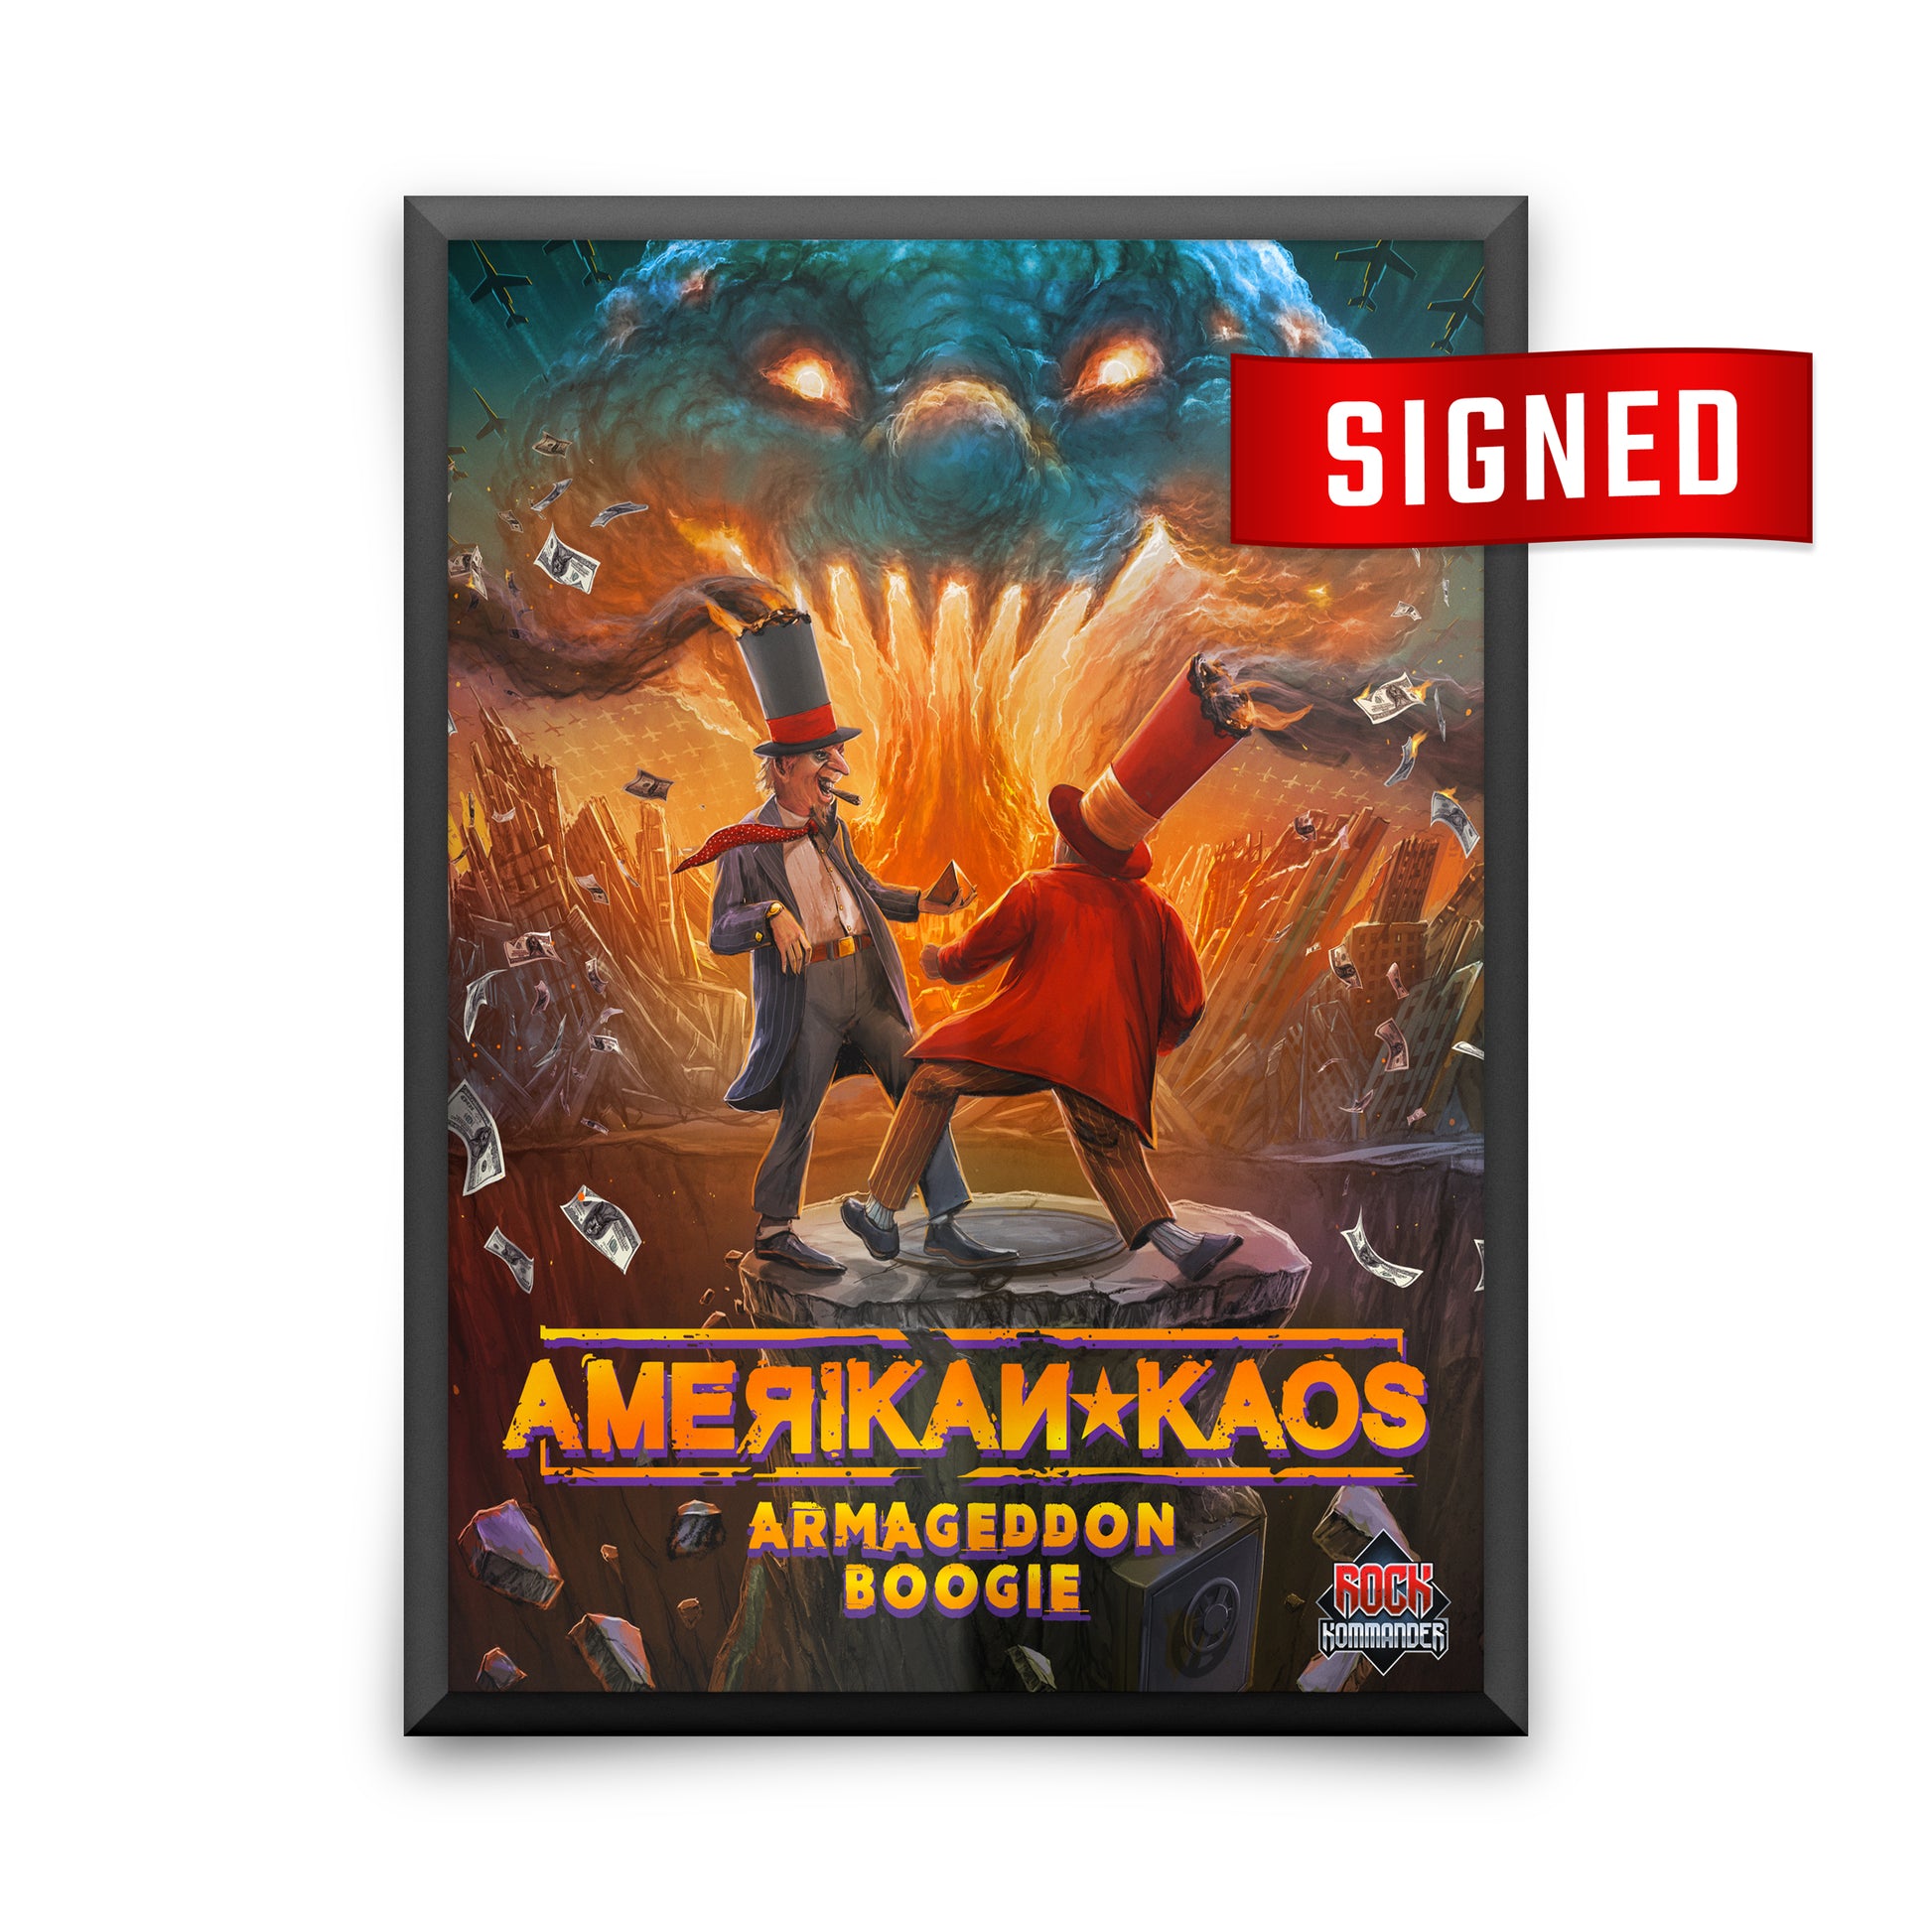 Amerikan Kaos Poster signed by Jeff Waters from Rock Kommander